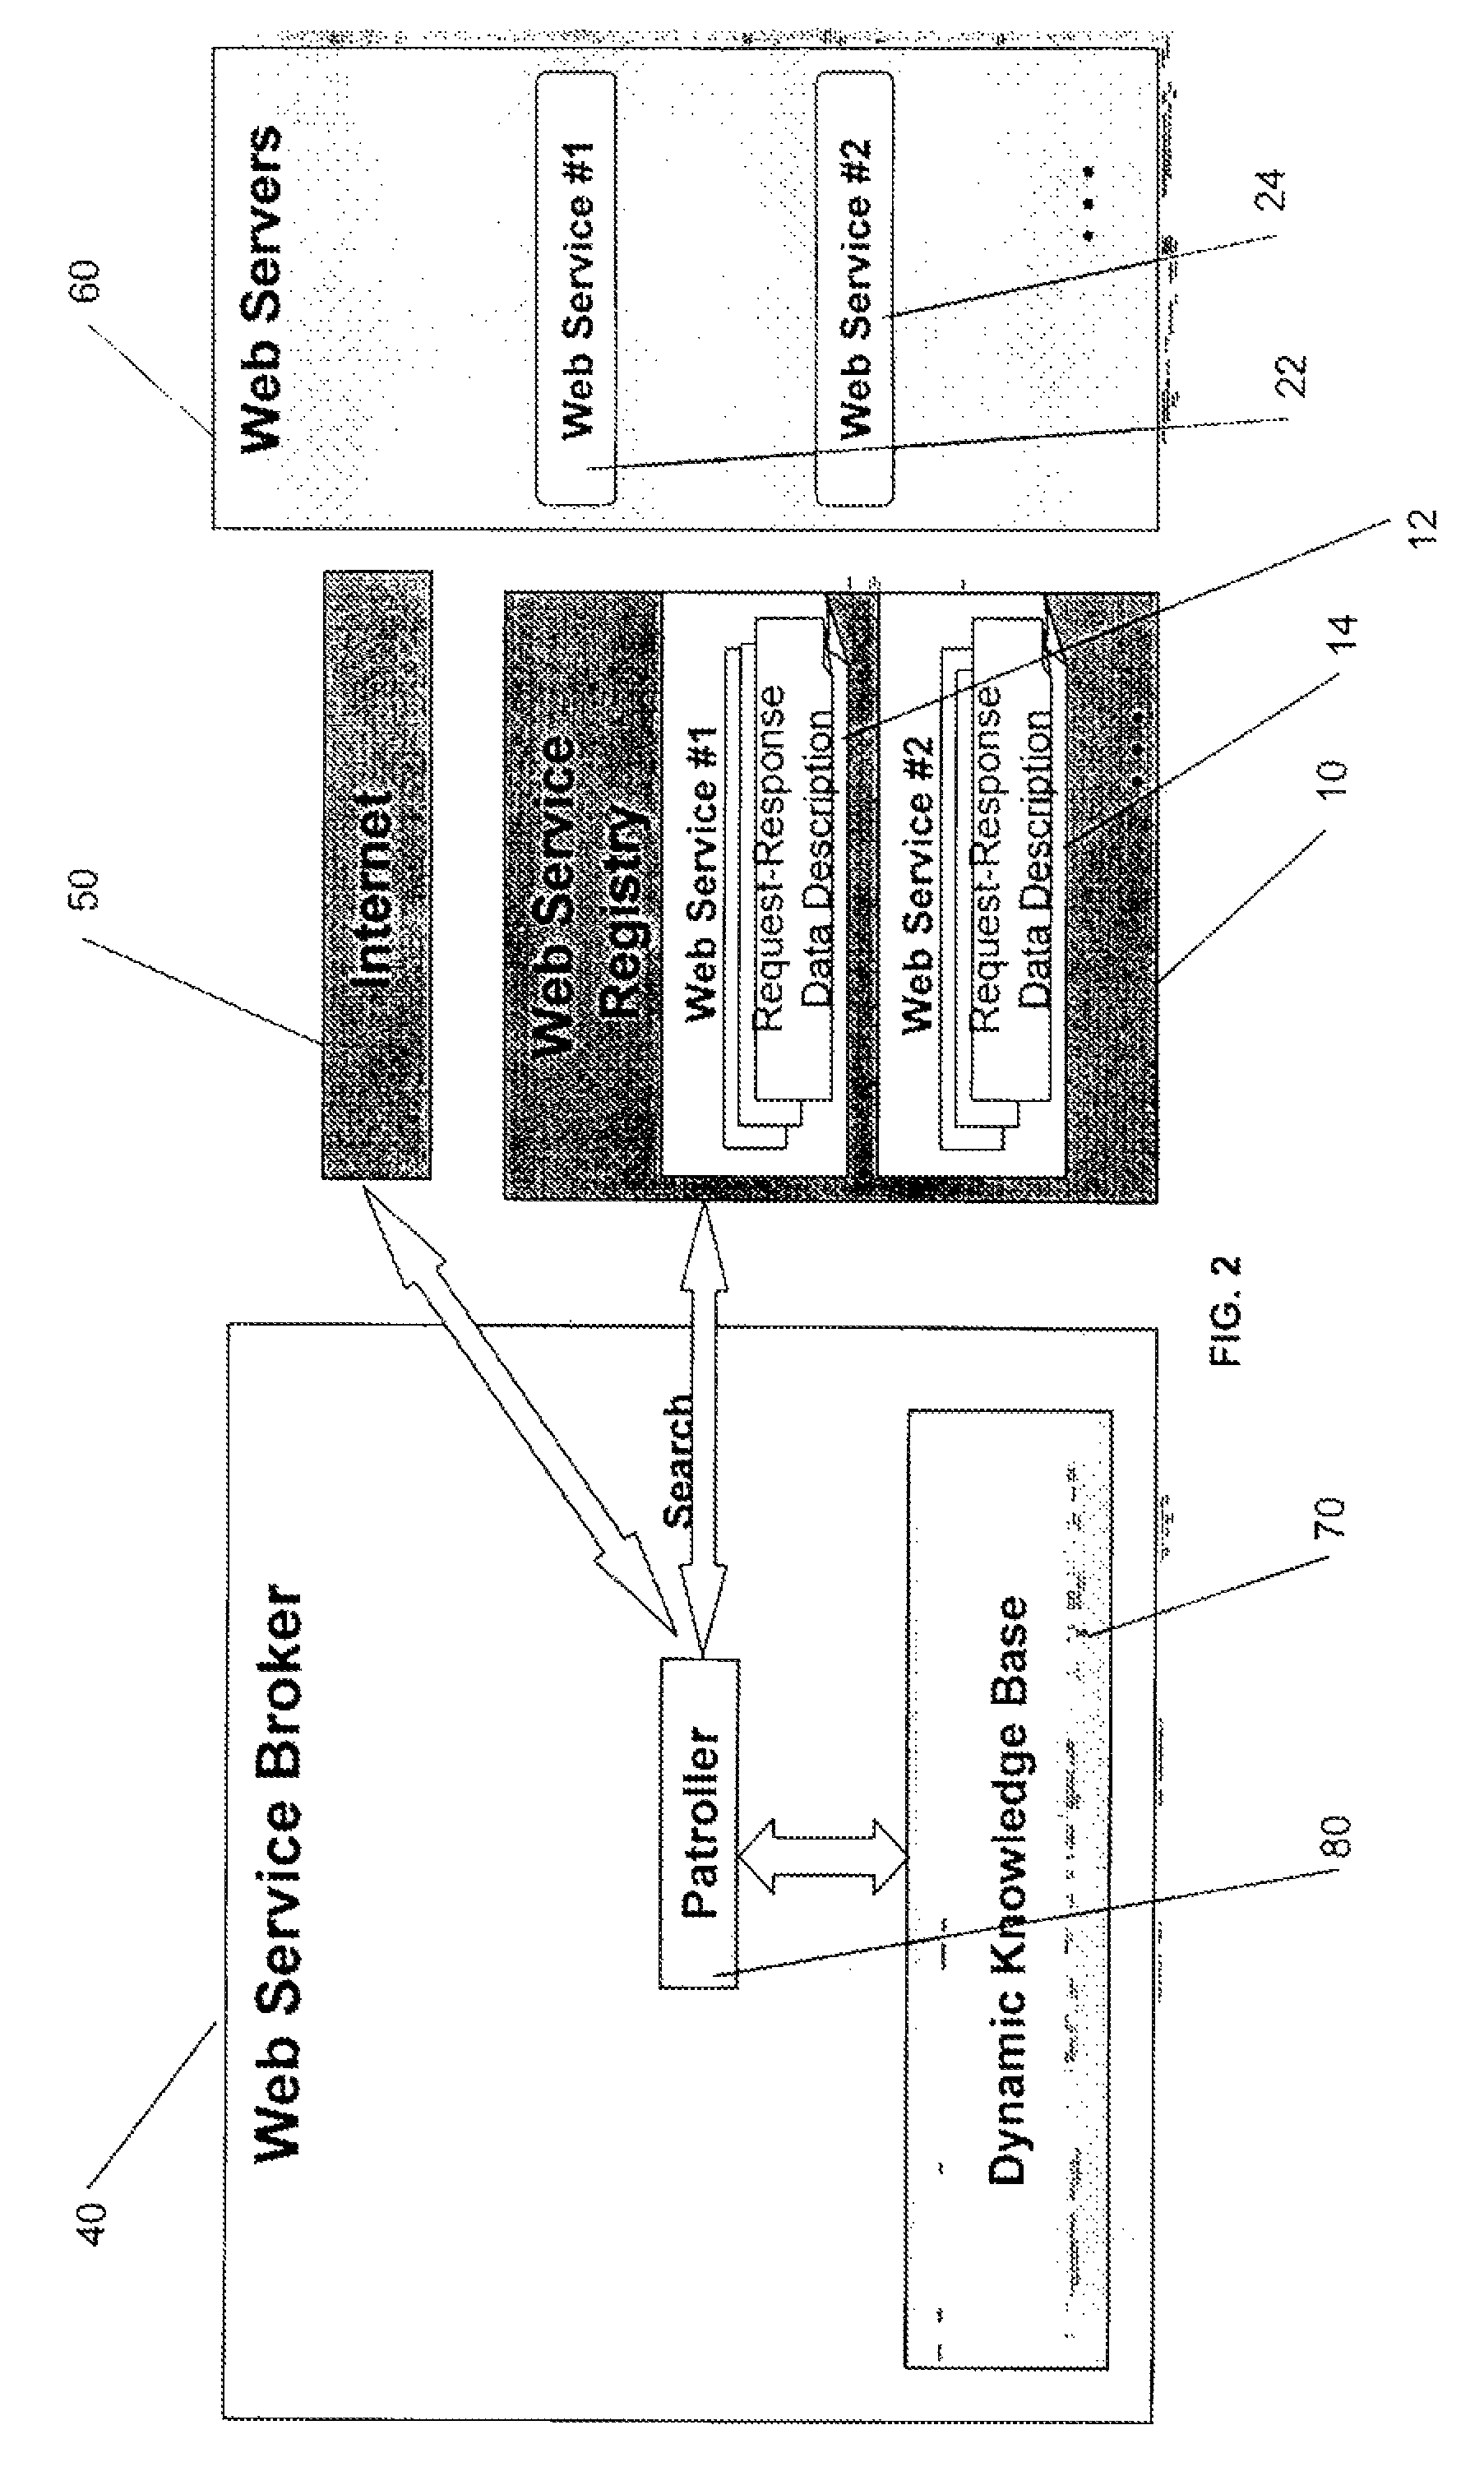 System and method for web service discovery and access